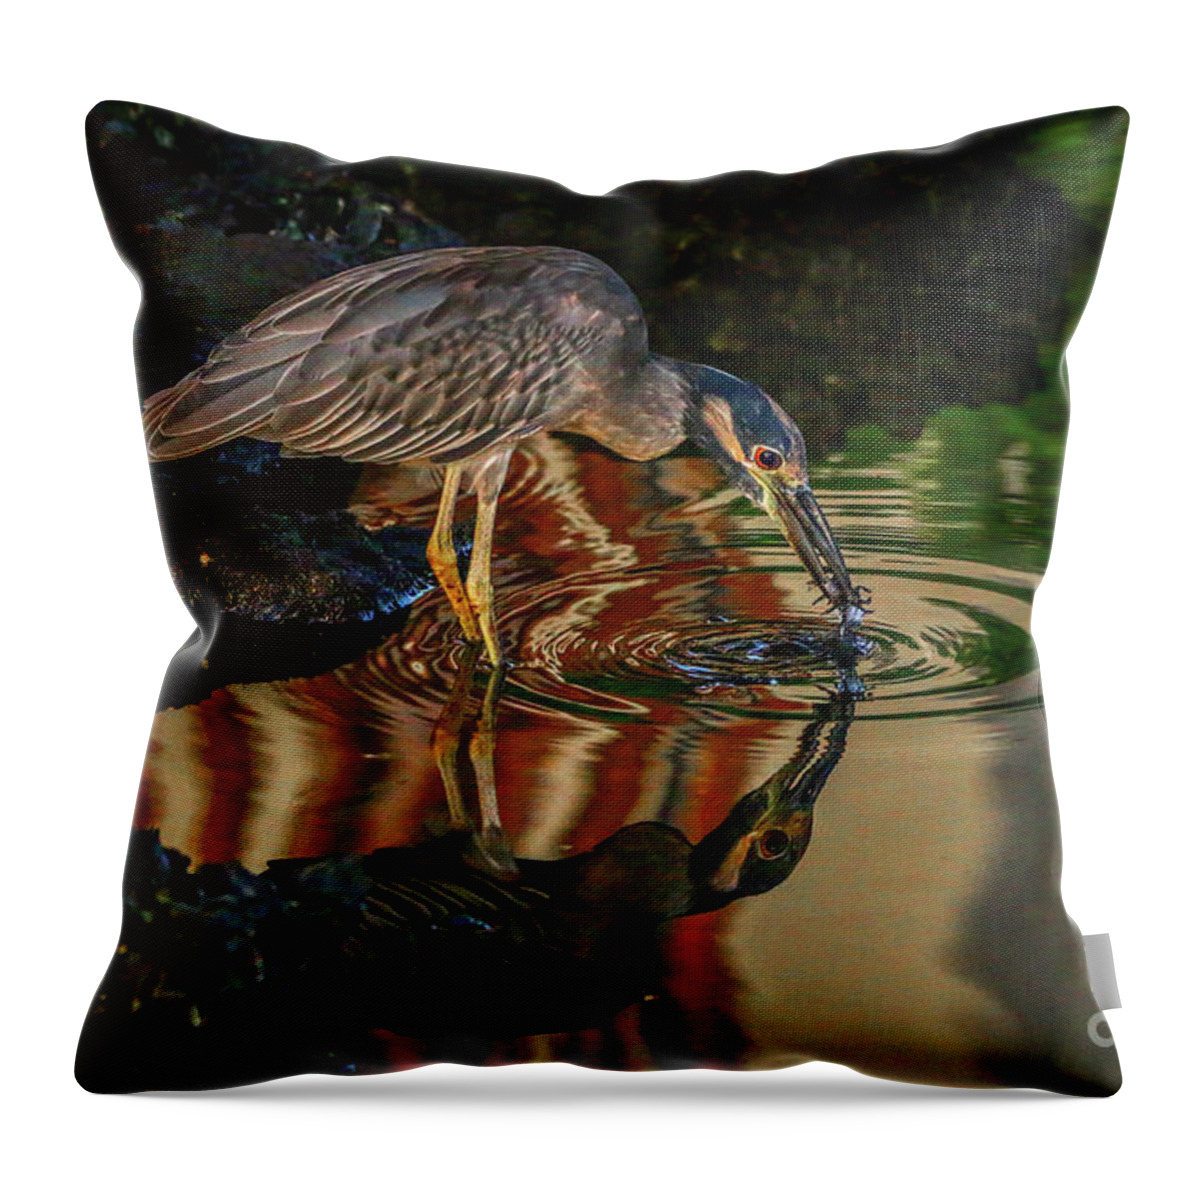 Heron Throw Pillow featuring the photograph Night Heron Catch by Tom Claud